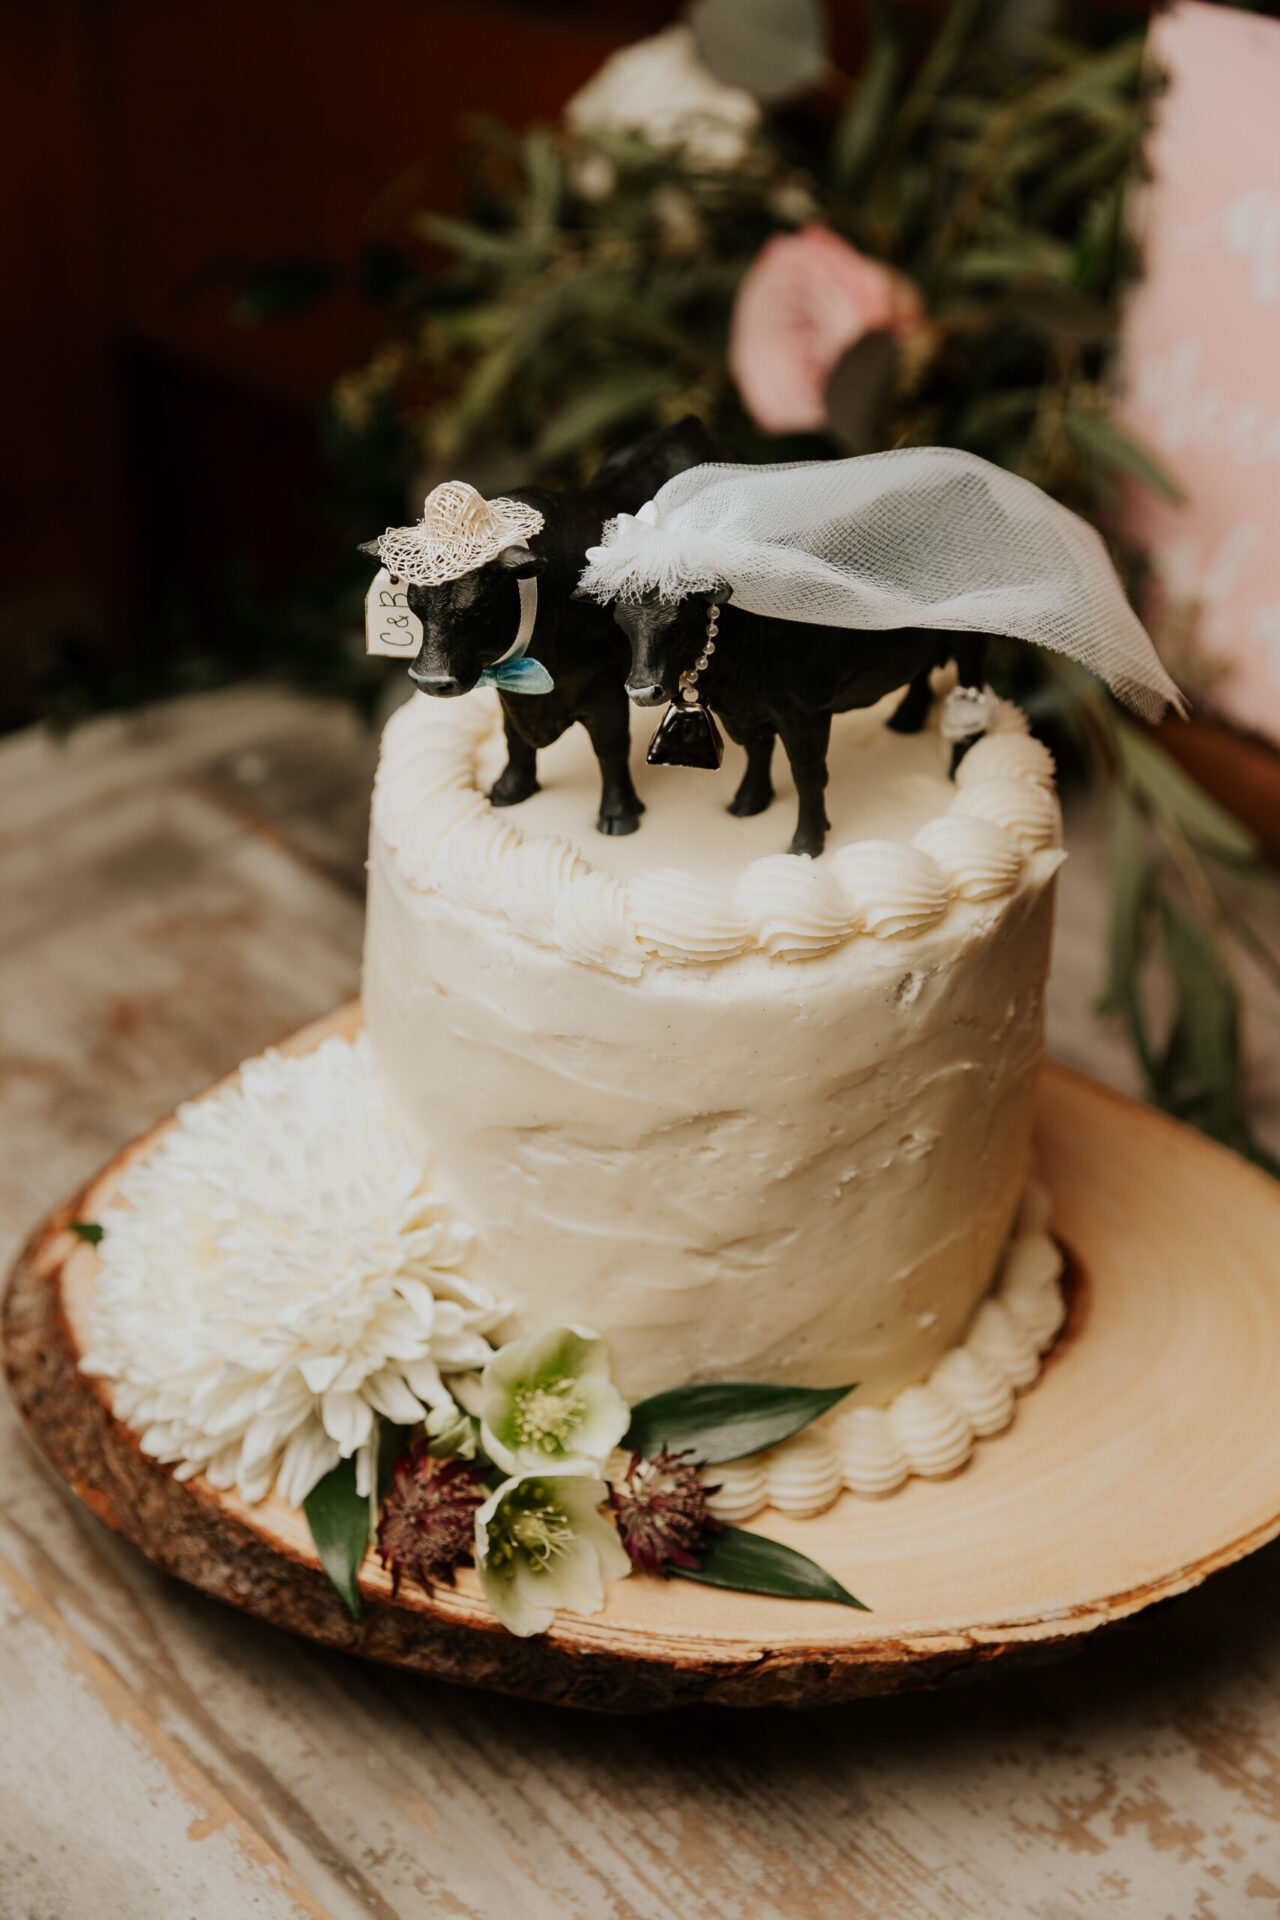 Zion Springs white wedding cake with black cow figurines